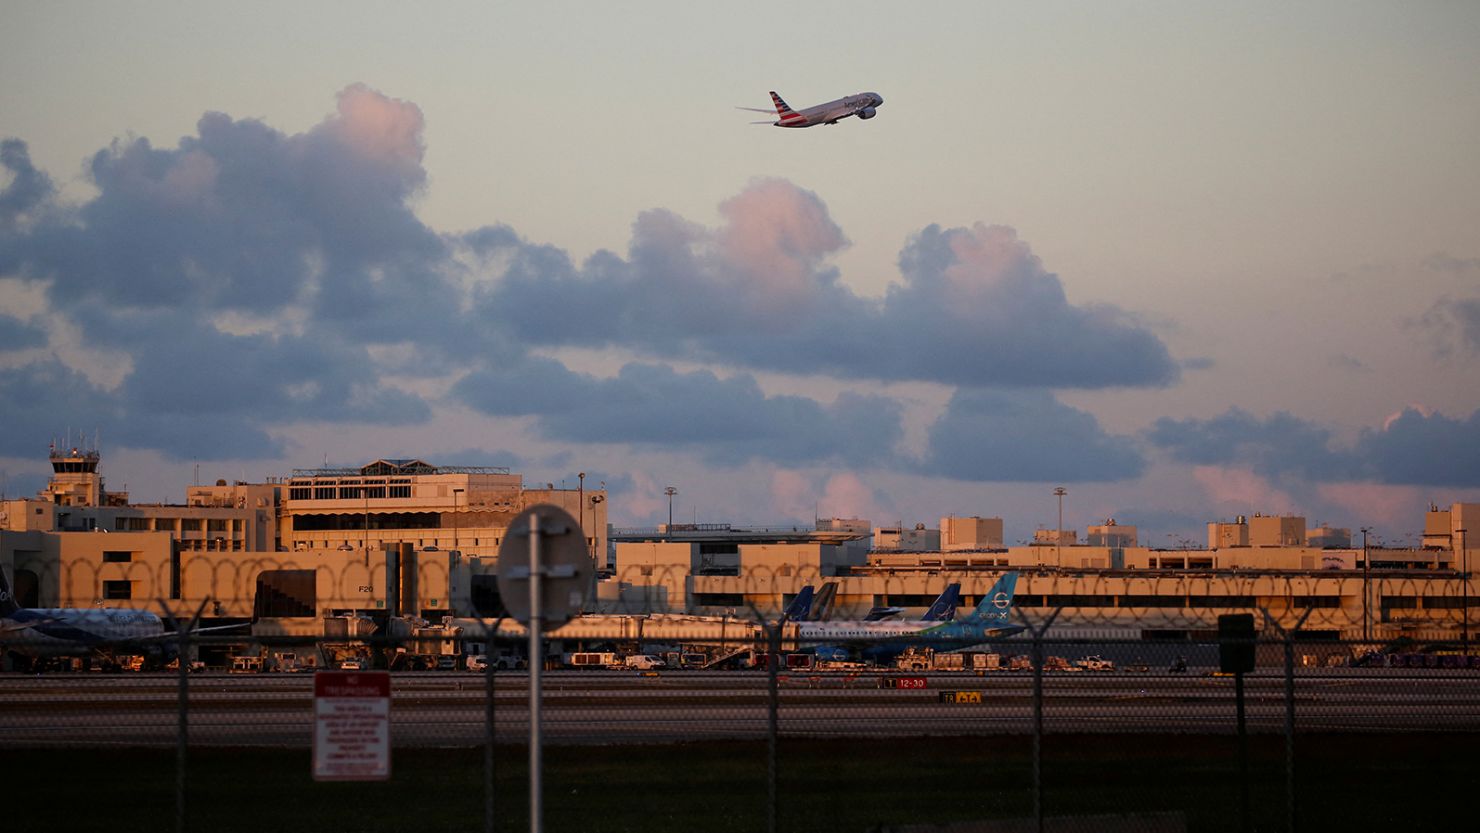 An American Airlines plane takes off from Miami International Airport on January 2, 2023. The airport is advising people to show up three hours early for a domestic flight for spring travel.